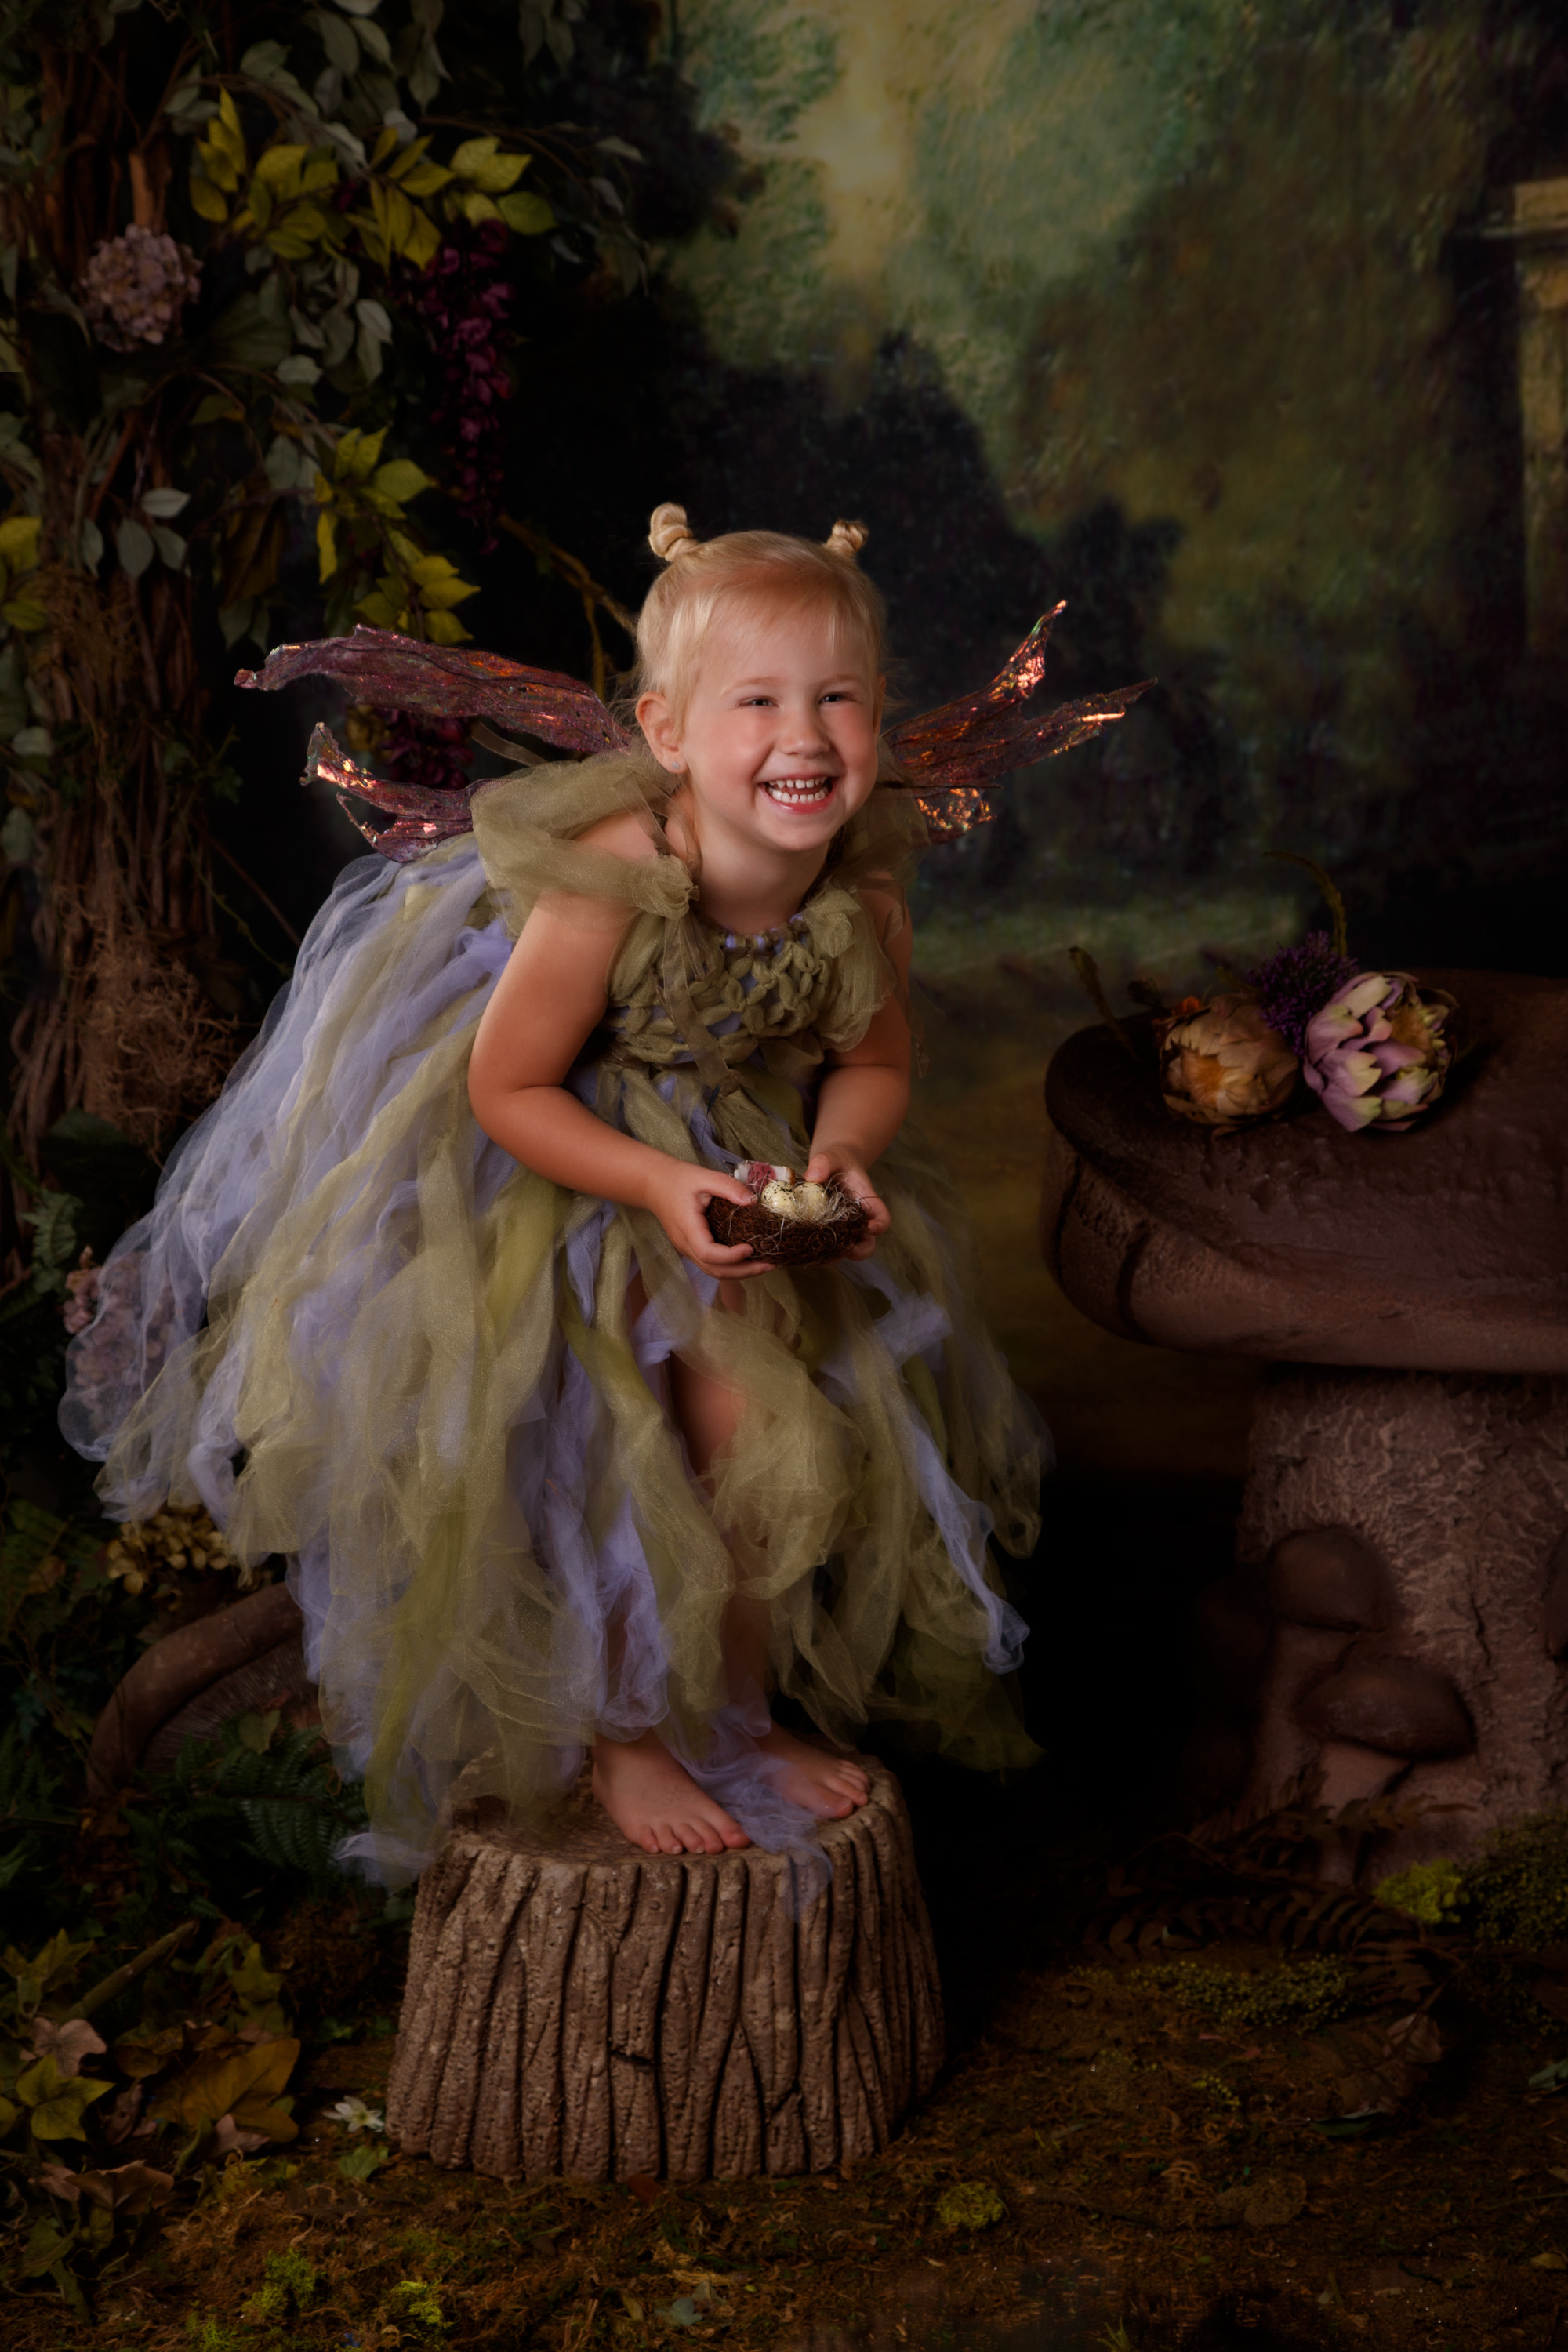 Ourlet thermocollant 20mm - 5M - Valentine's Enchanted Fairies